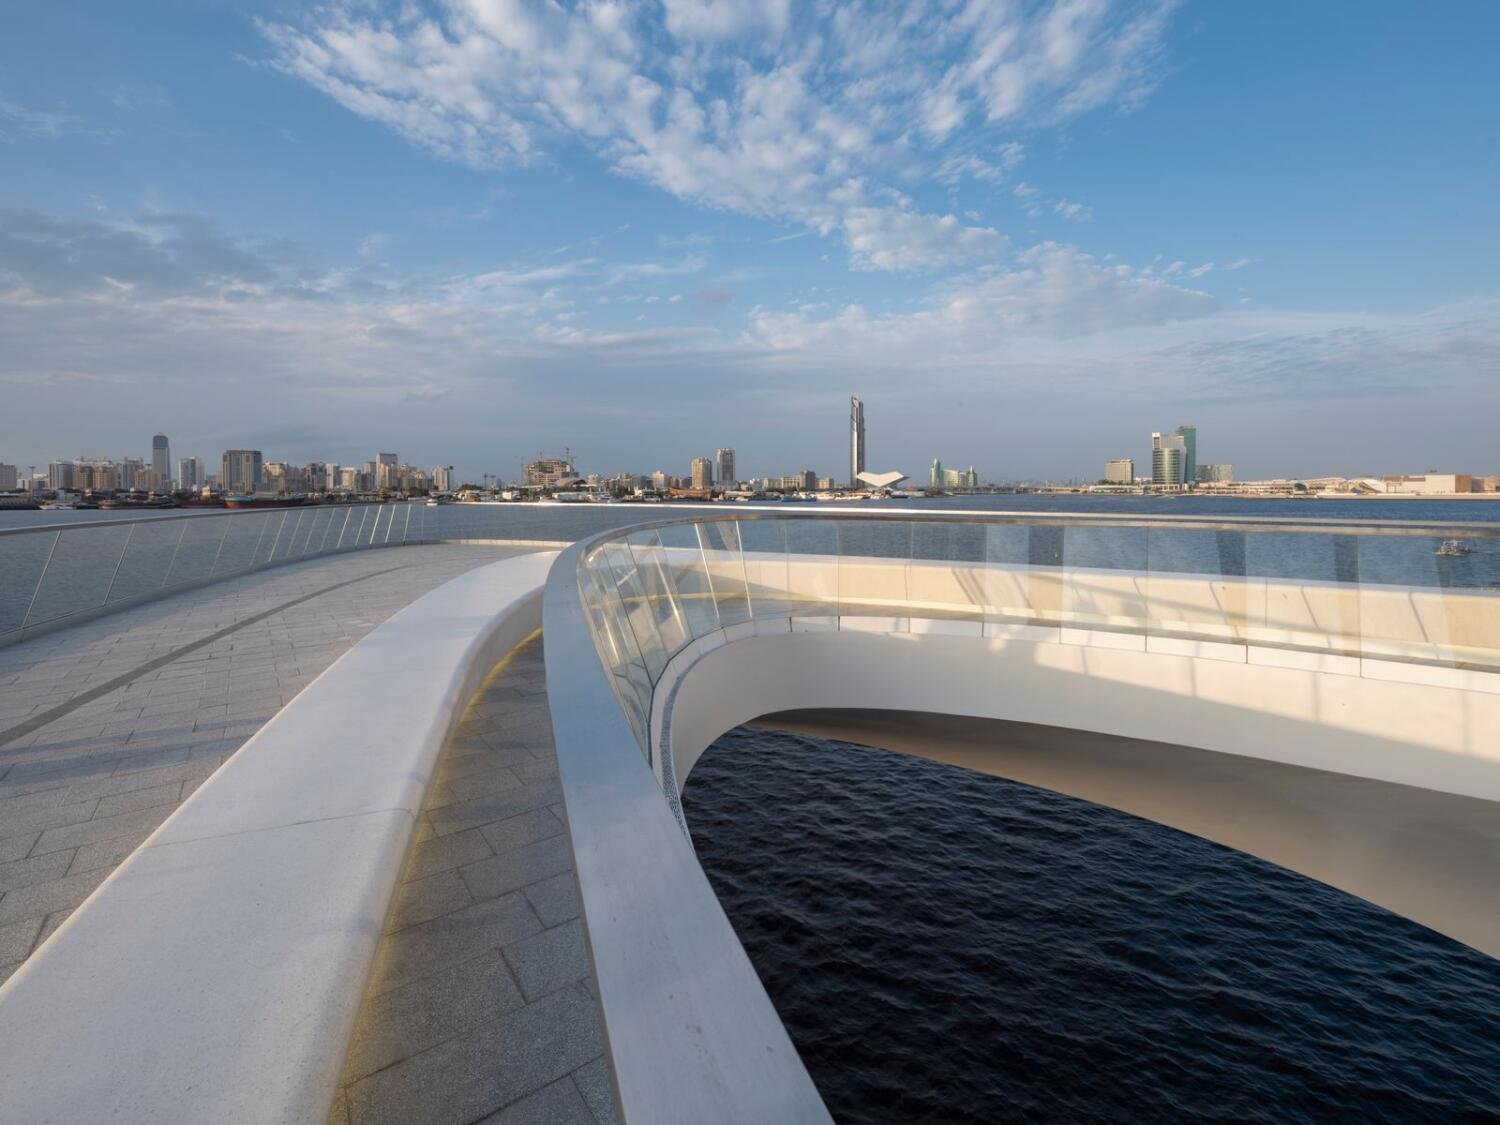 New viewing deck over Dubai Creek Harbour offers stunning views.